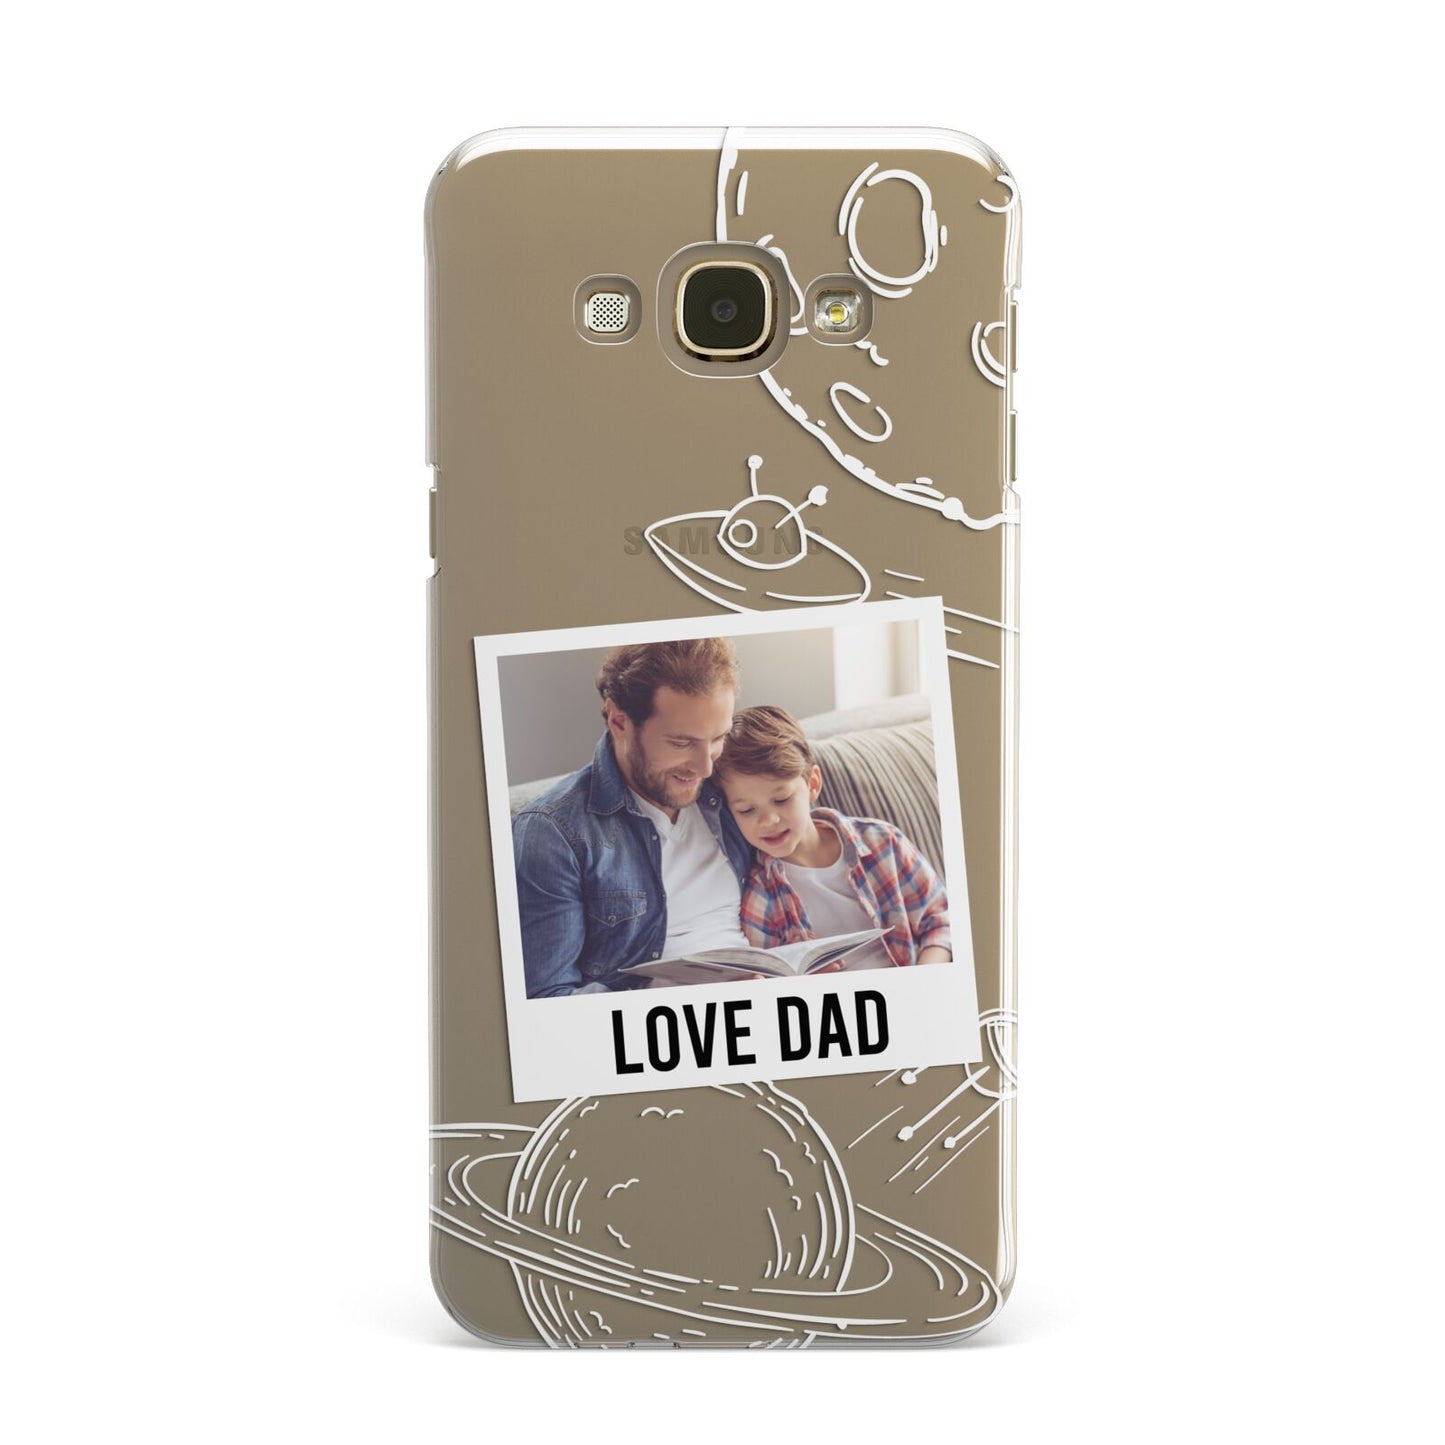 Personalised From Dad Photo Samsung Galaxy A8 Case